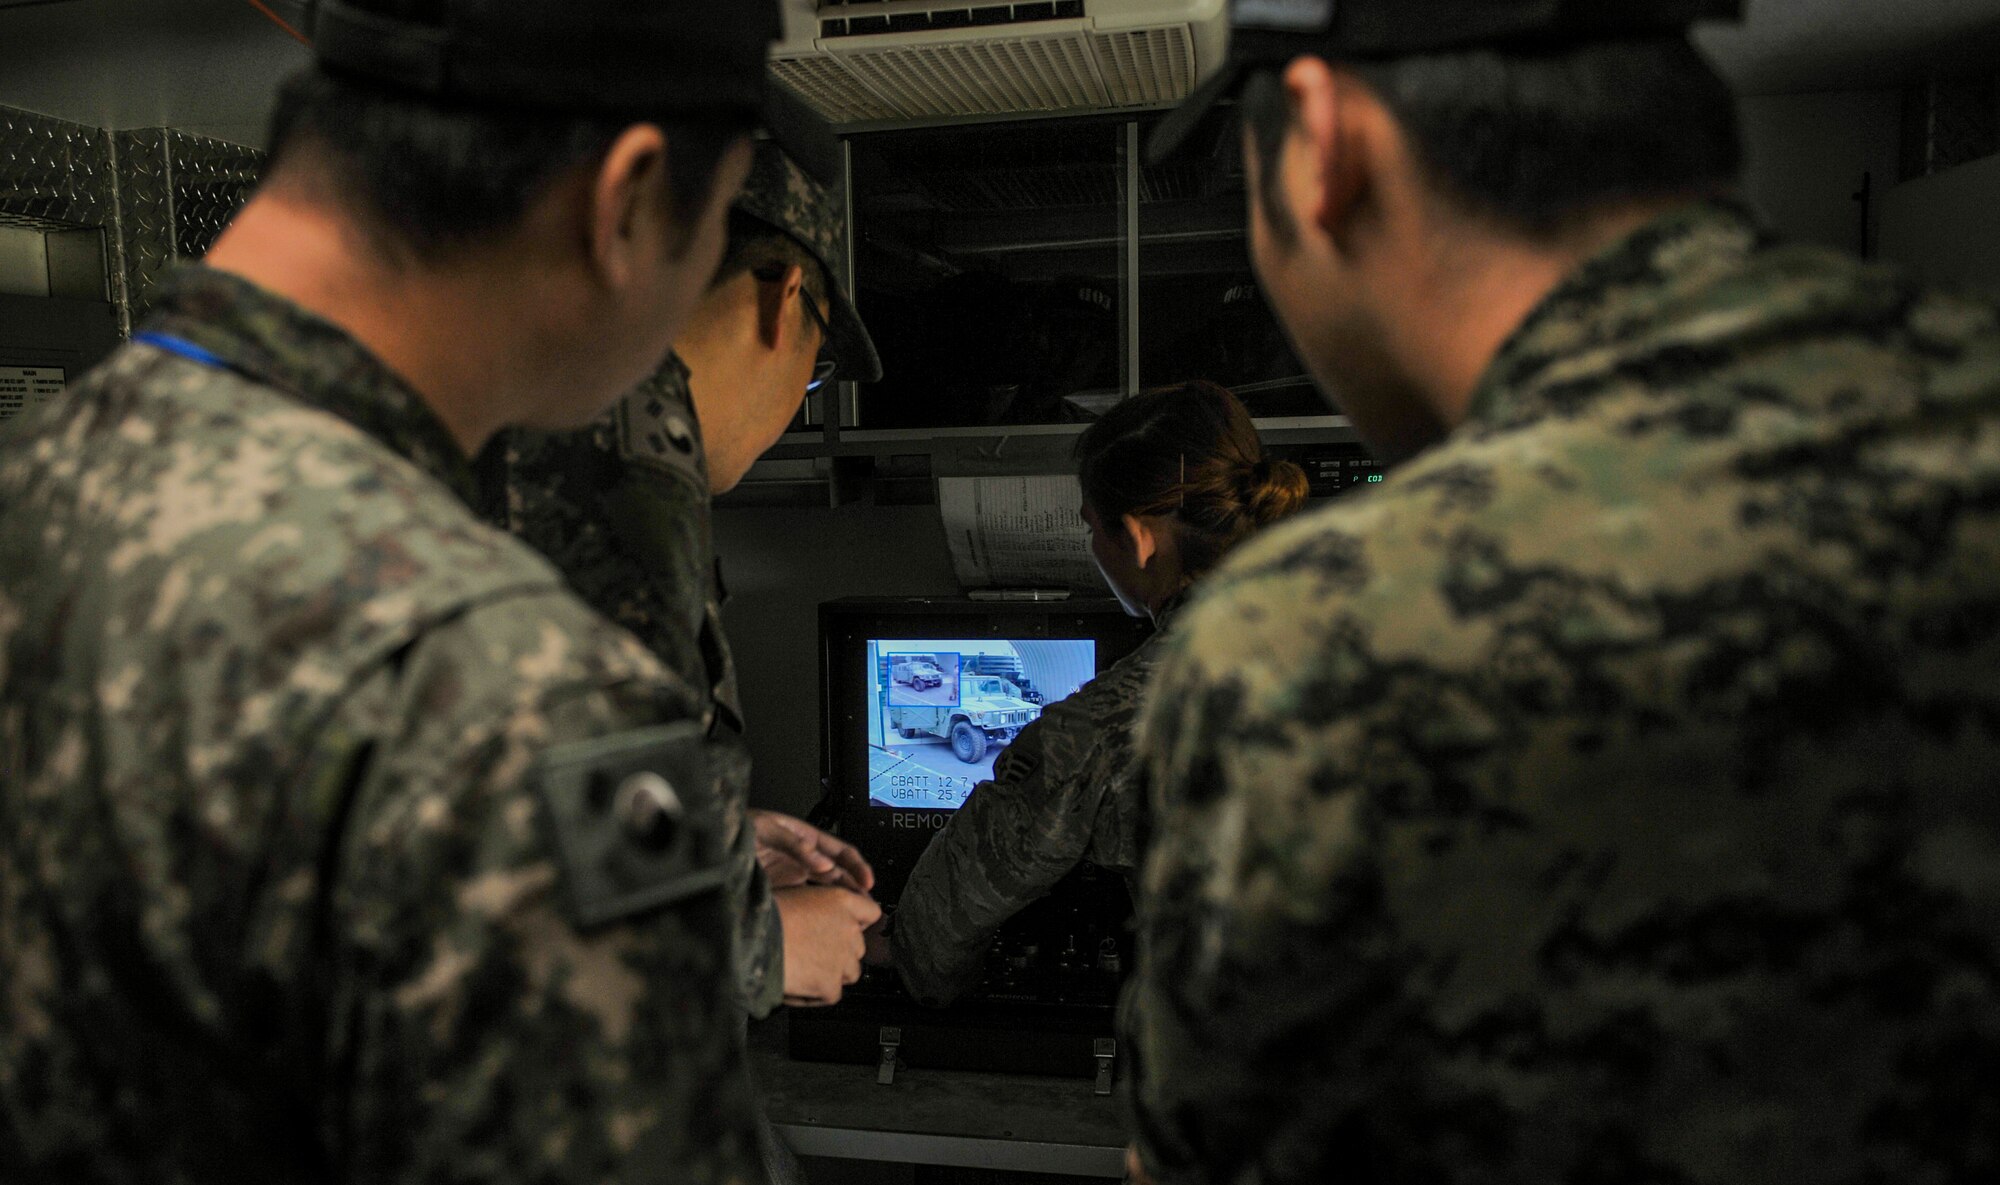 U.S. Air Force Senior Airman Kristen Fay, 8th Civil Engineer Squadron explosive ordnance disposal technician, shows Republic of Korea Air Force EOD team how the remote controls for the Andros F-6 robot work at Kunsan Air Base, Republic of Korea, Nov. 7, 2016. This training increases U.S. and ROK interoperability and ultimately enhances U.S. and ROK commitments to maintain peace in the region. (U.S. Air Force photo by Senior Airman Colville McFee/Released)